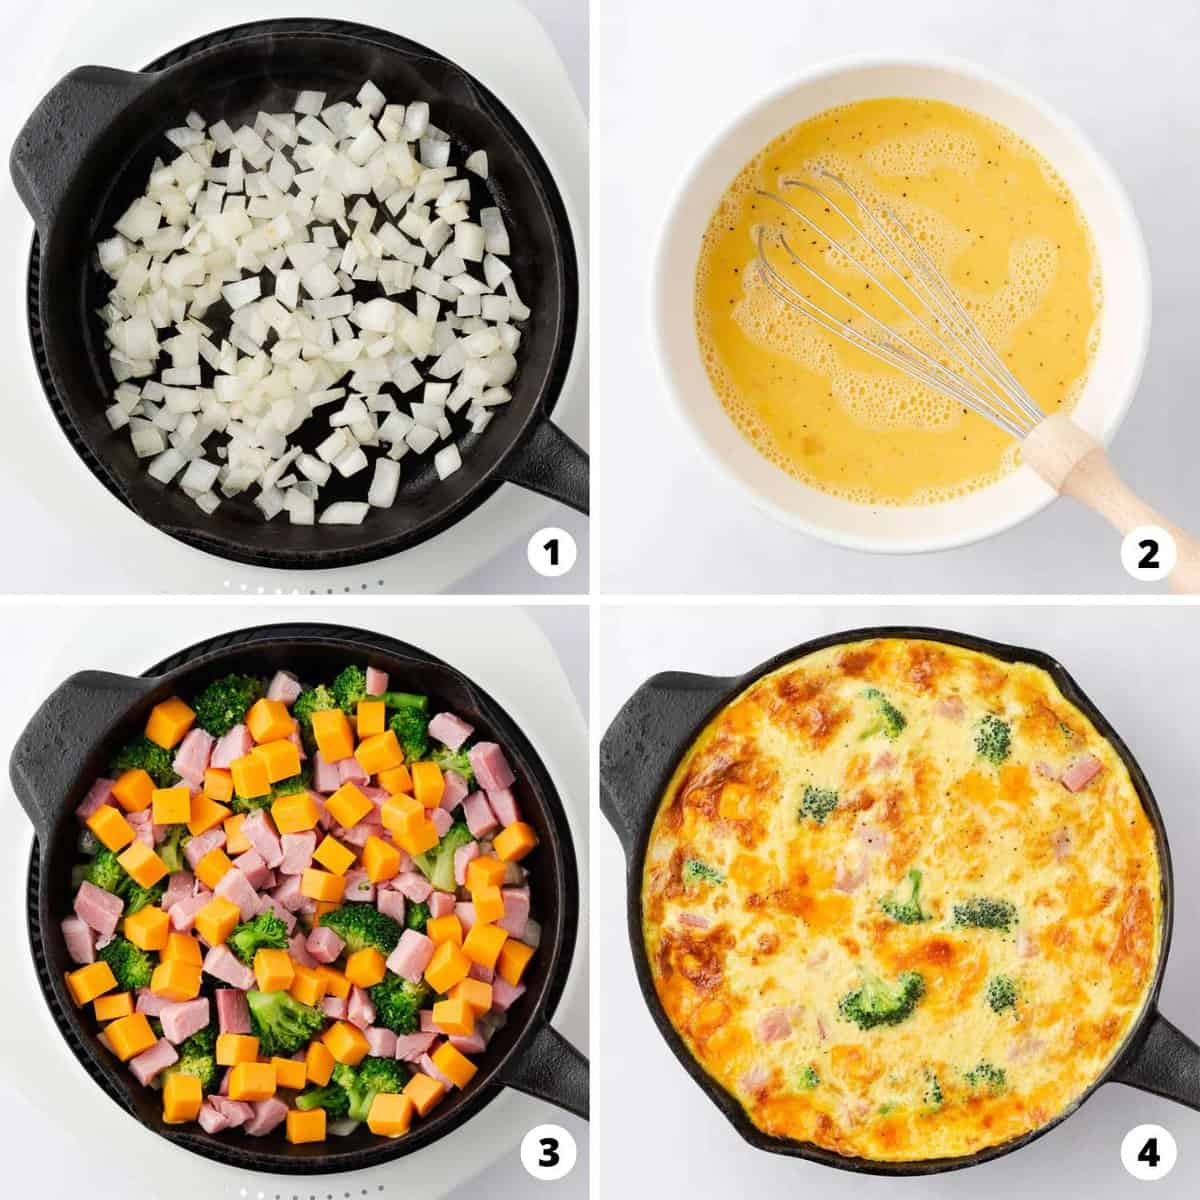 Showing how to make a ham and cheese frittata in a 4 step collage.